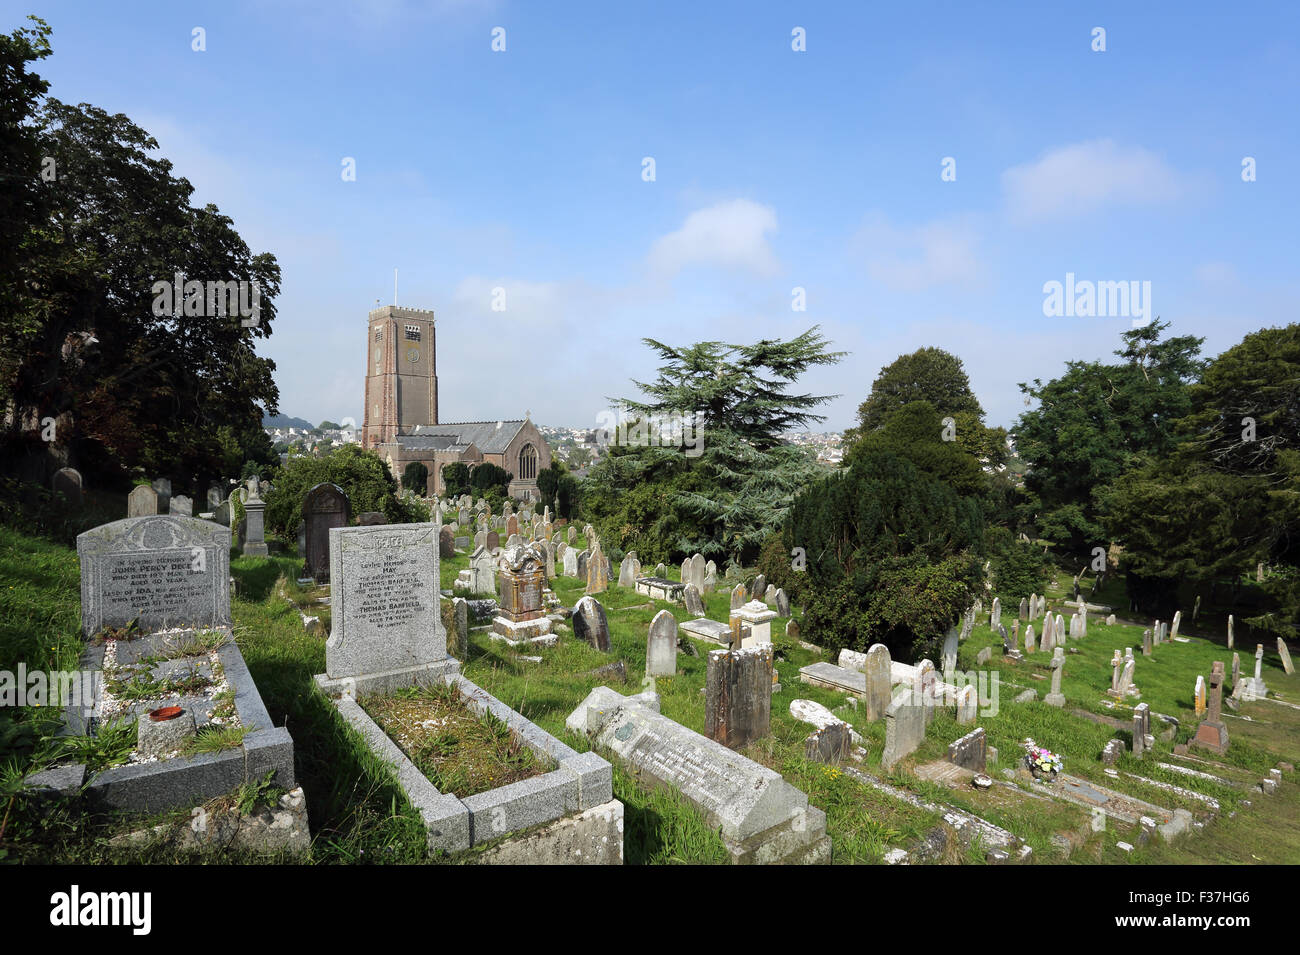 Graveyard in grounds of St. Mary's Church, Brixham, Devon, England, UK, with the church in the background. Stock Photo